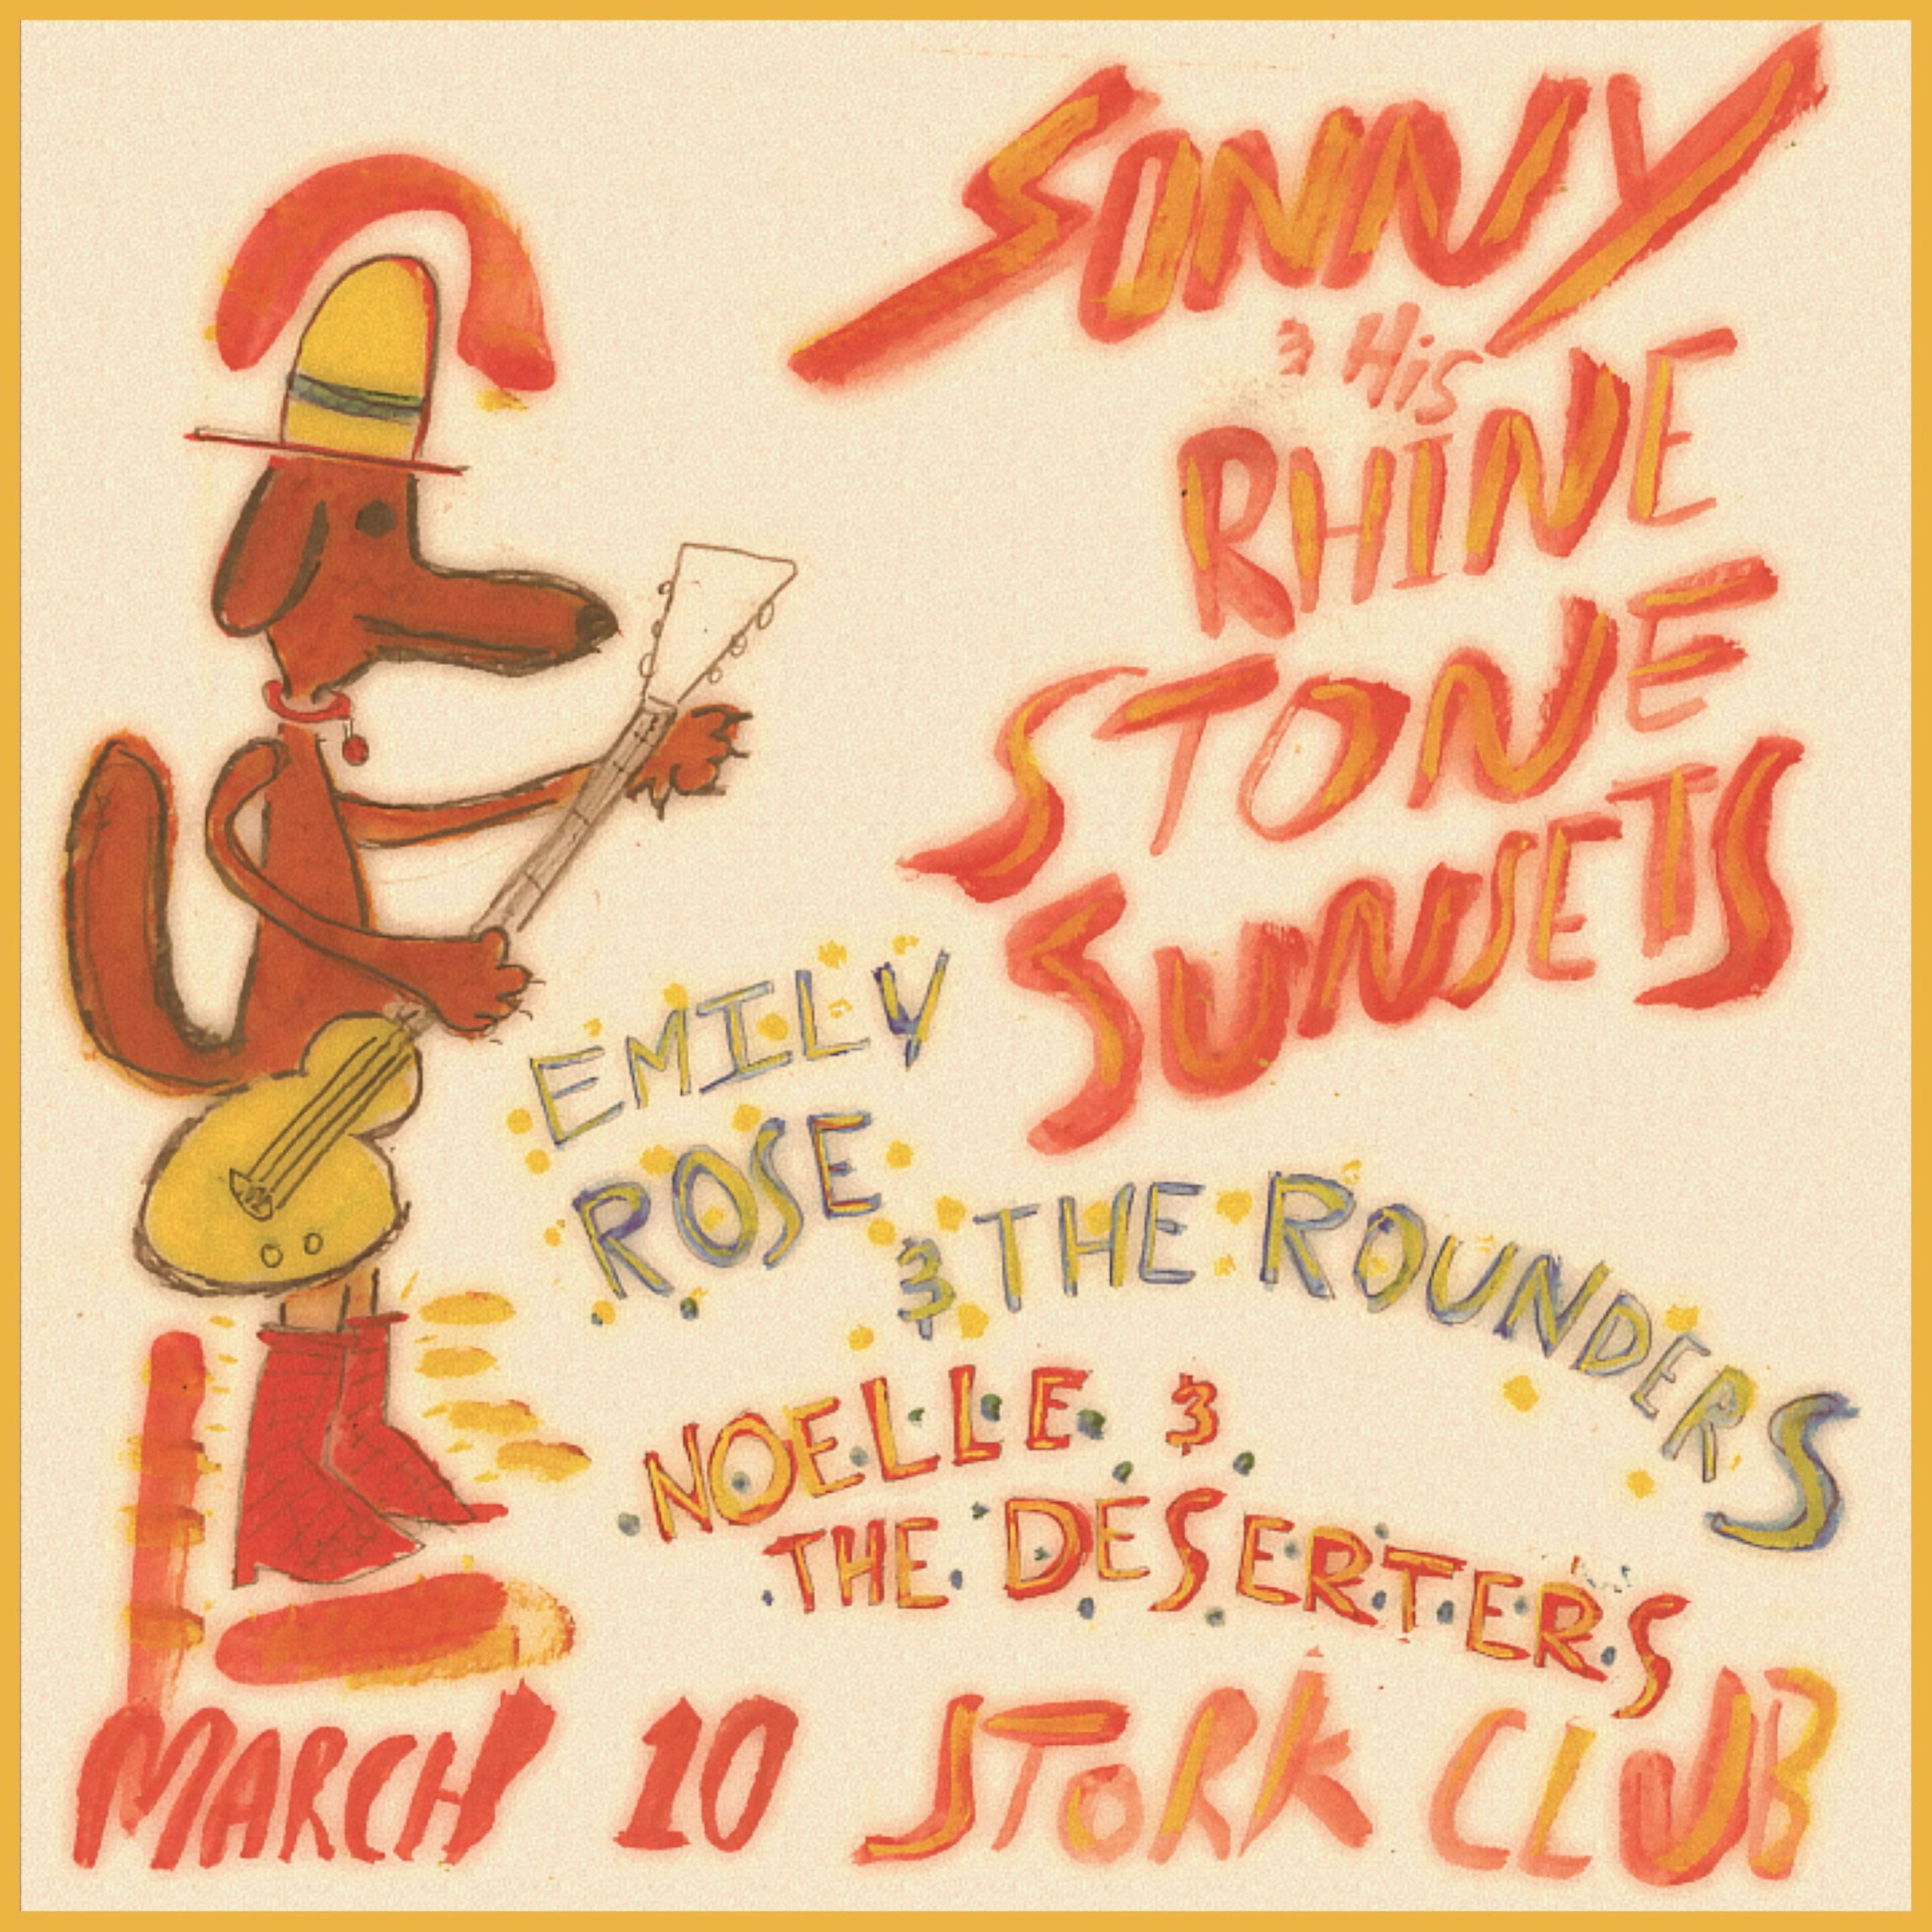 KXSF presents! At Thee Stork Club in Oakland on Fri. 3/10/23. Sonny And His Rhinestone Sunsets , Emily Rose & The Rounders, Noelle and the Deserters